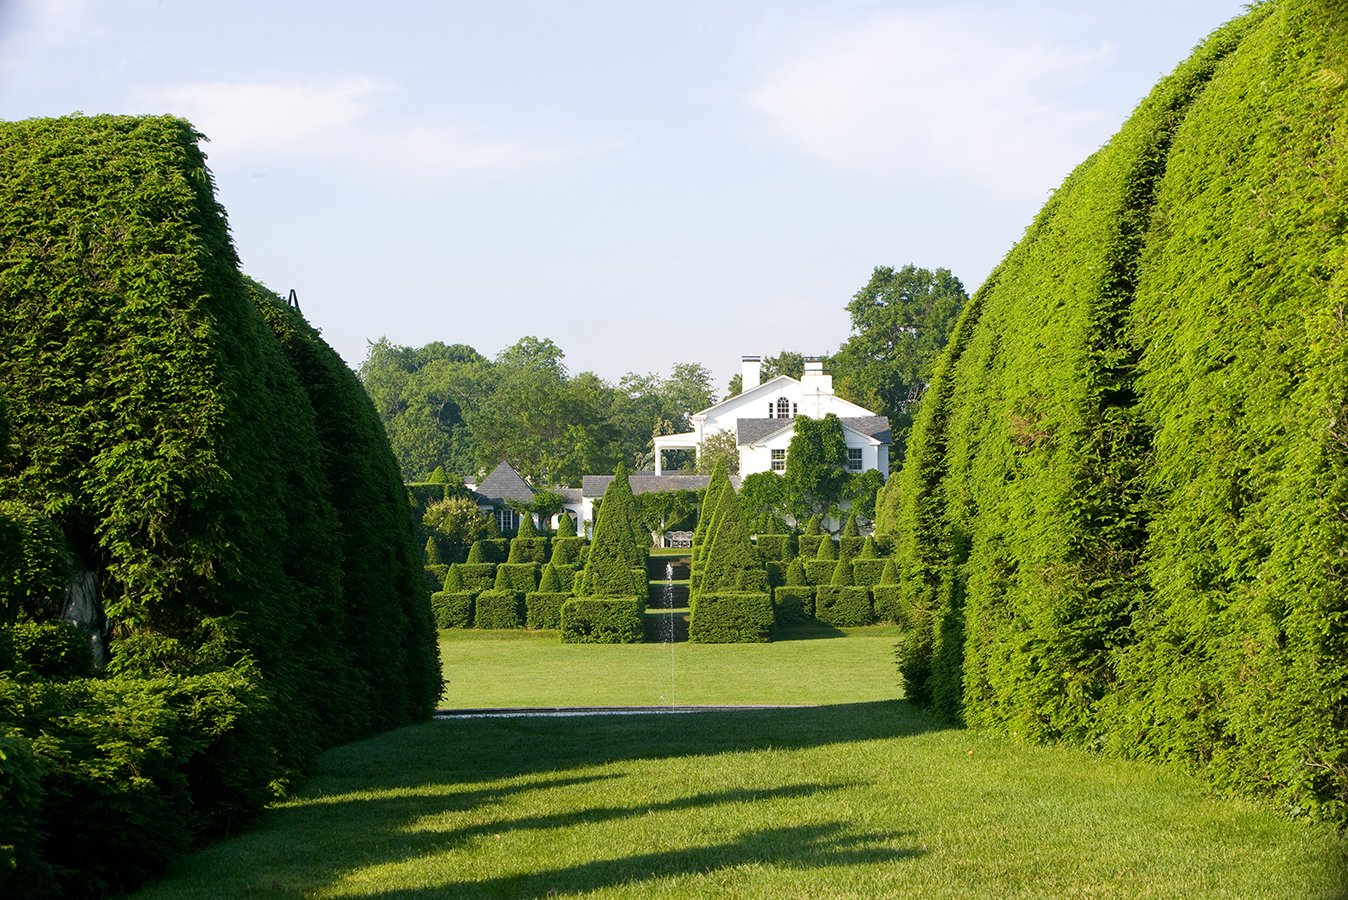 Ladew Topiary Gardens in Maryland - View across the Great Bowl to the Terraces